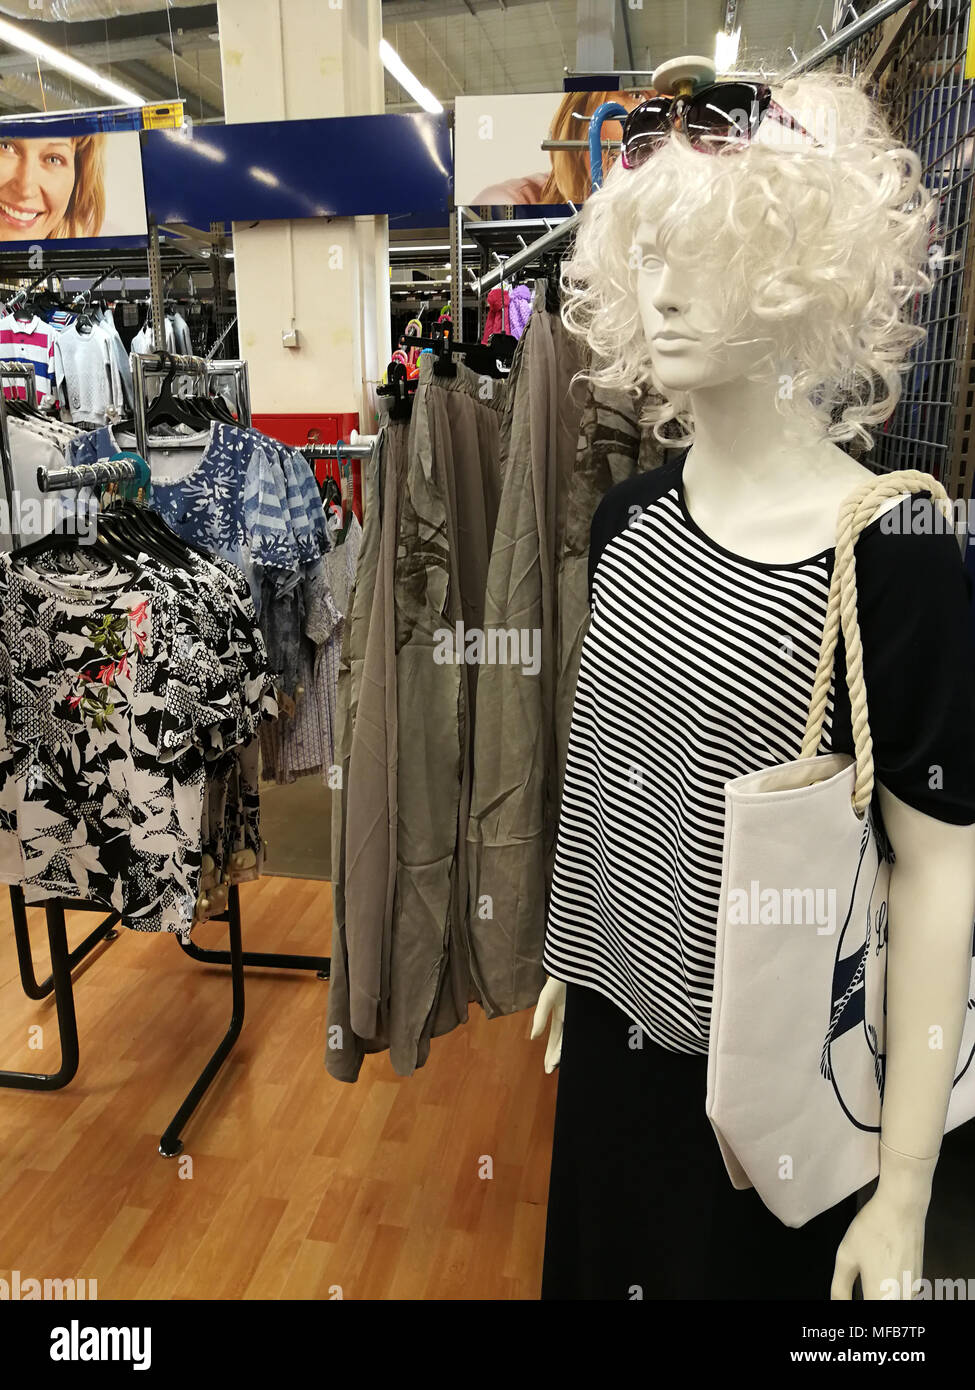 The women's mannequin inside the shopping center demonstrates the latest fashions. Stock Photo